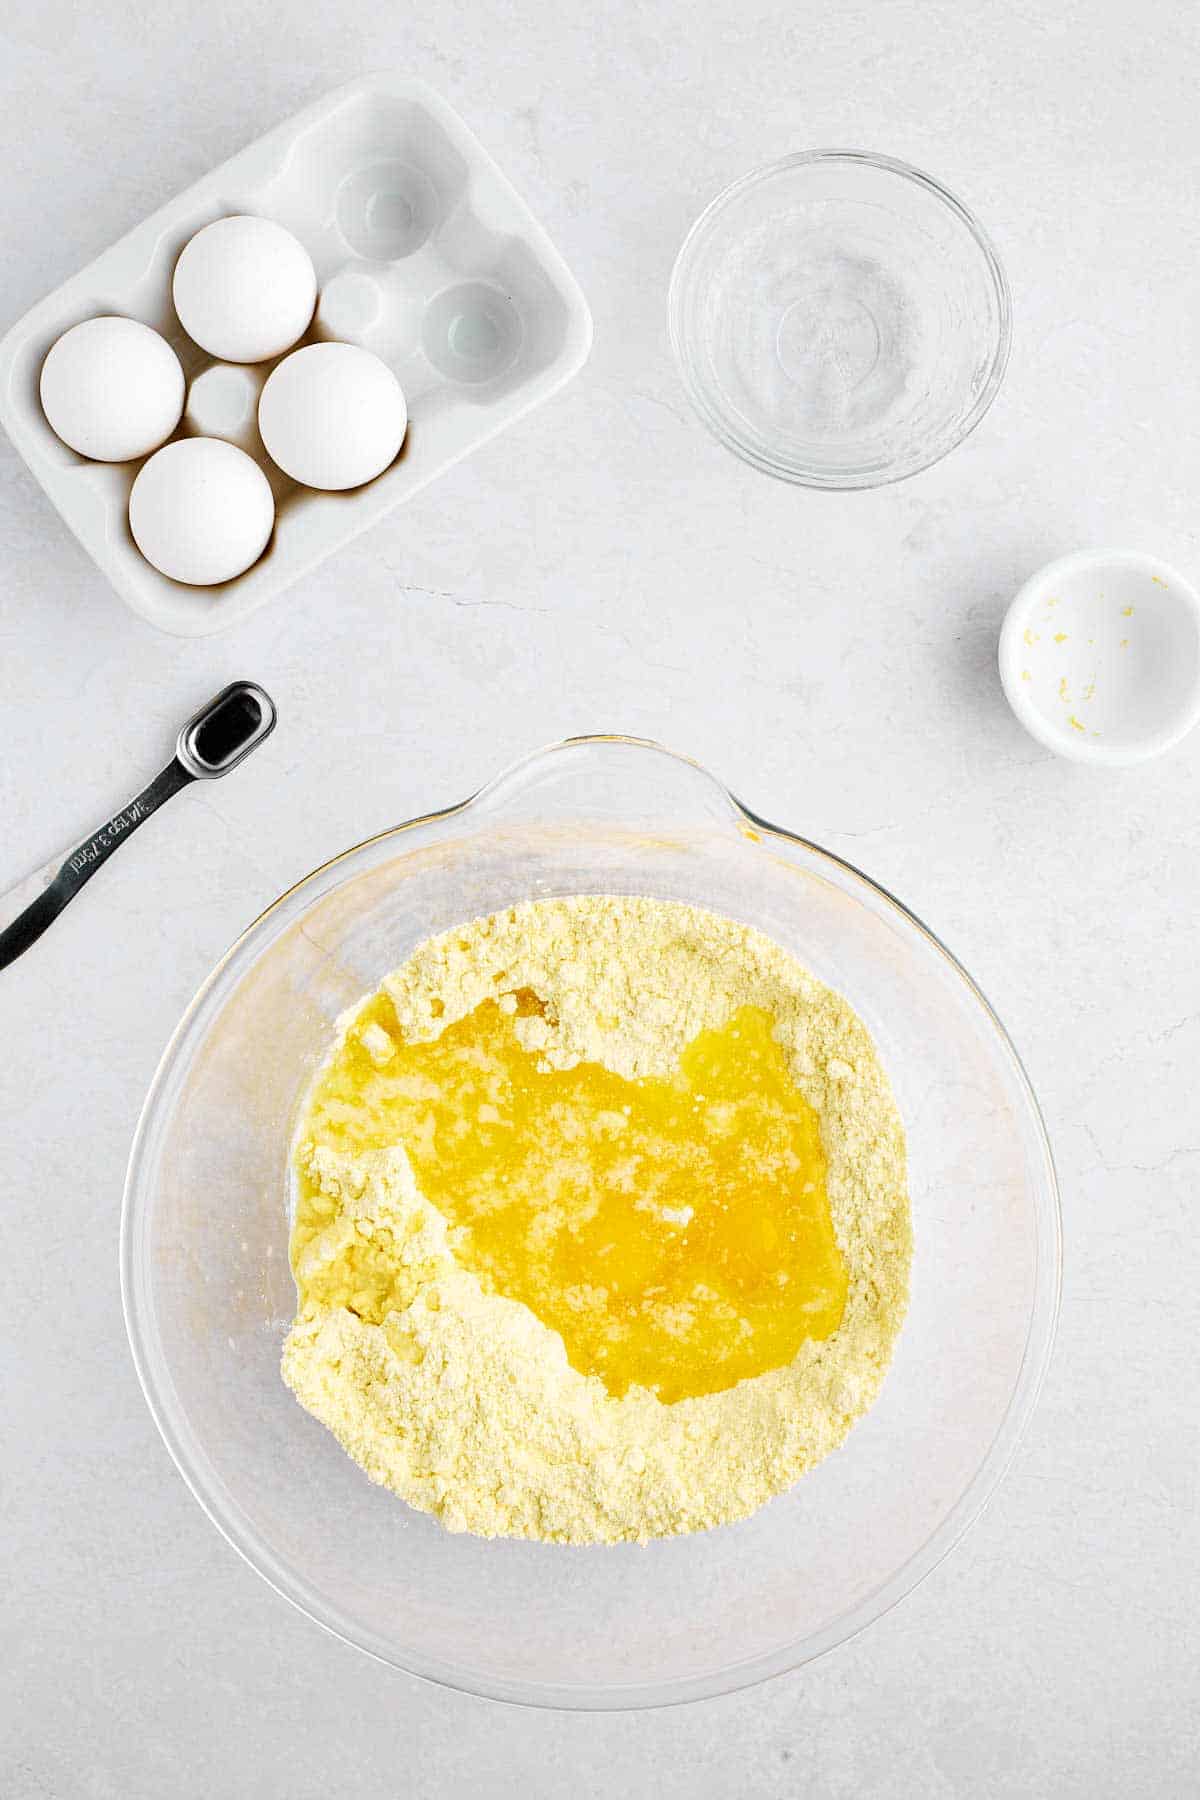 Melted butter and eggs poured into the cake mix.